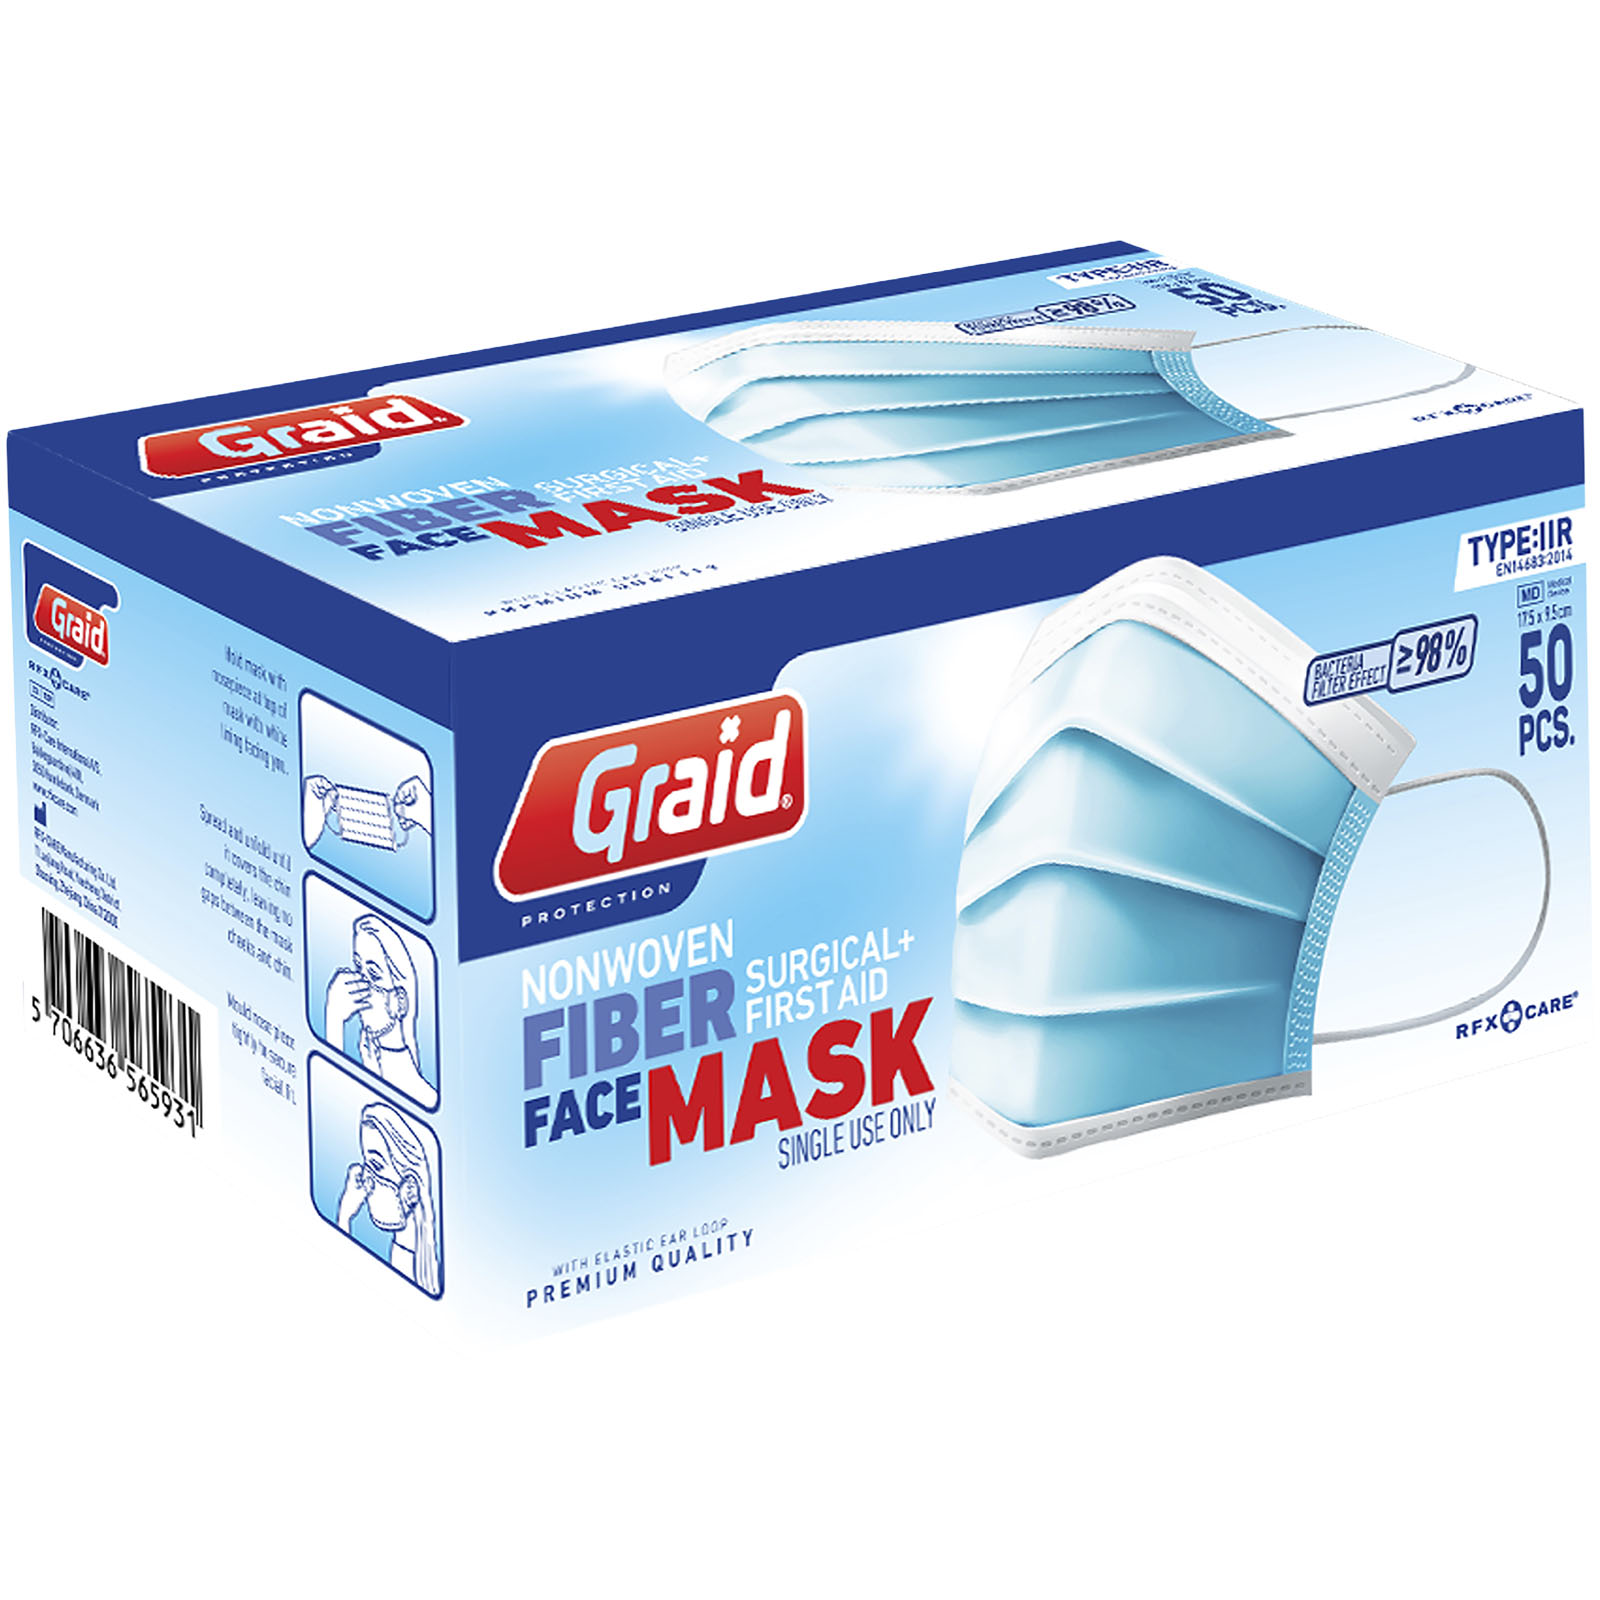 Advertising Protection - Moore type IIR face mask - 1